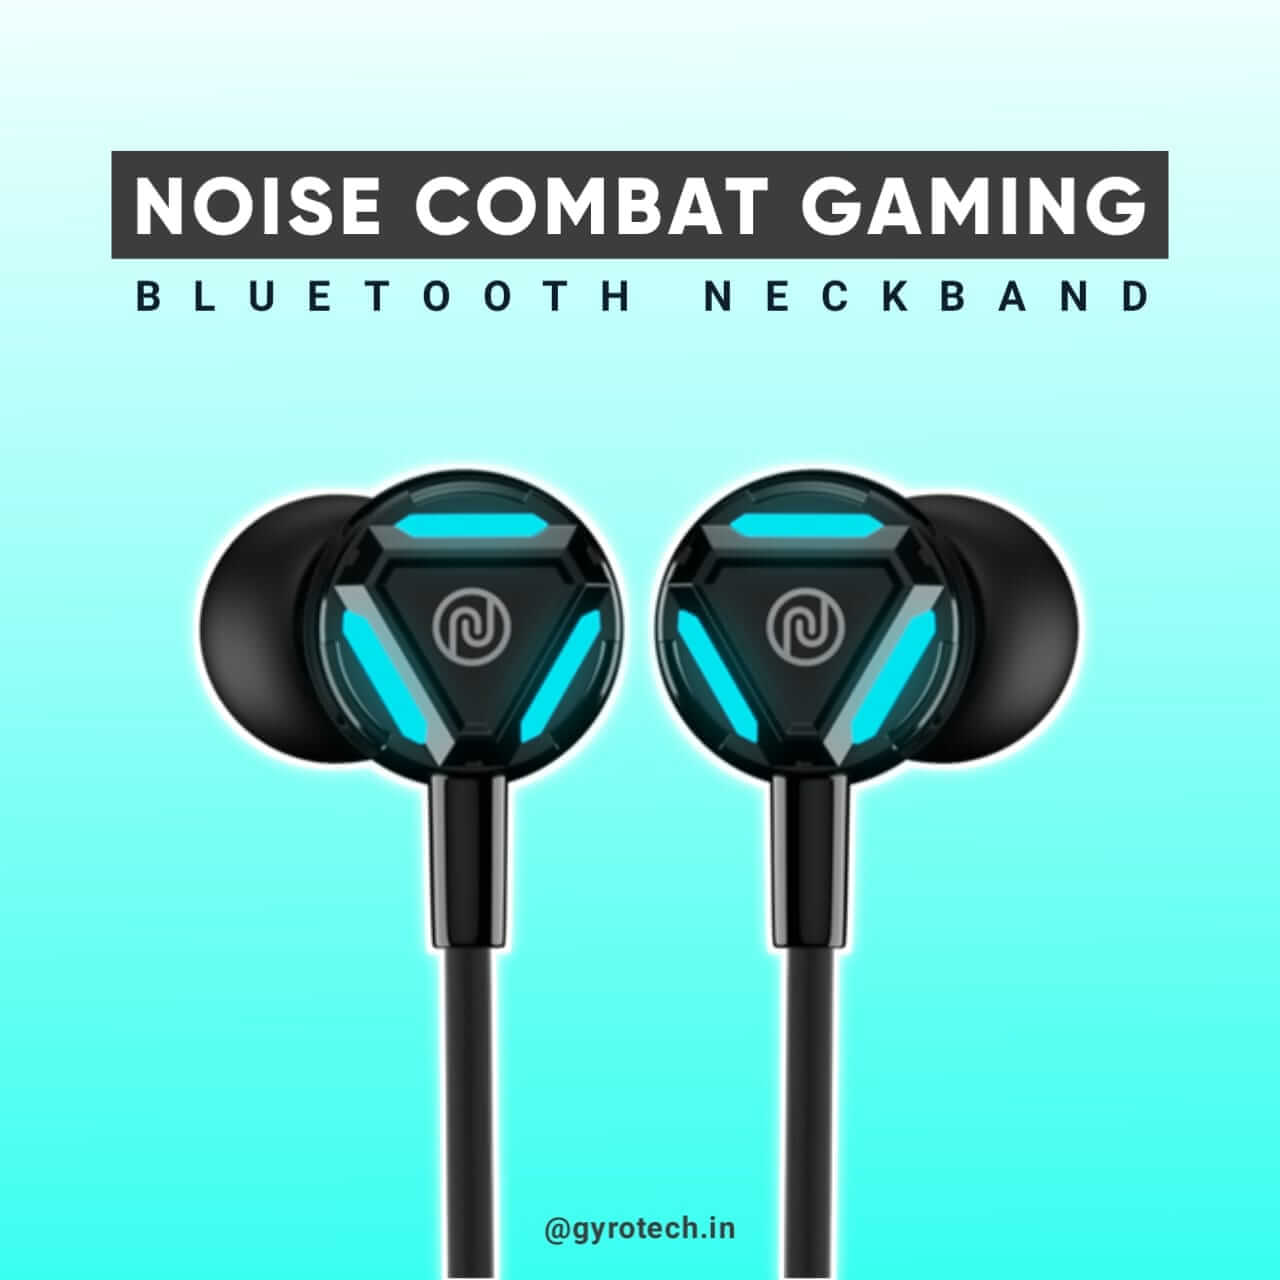 Noise Combat Gaming Bluetooth Neckband Review